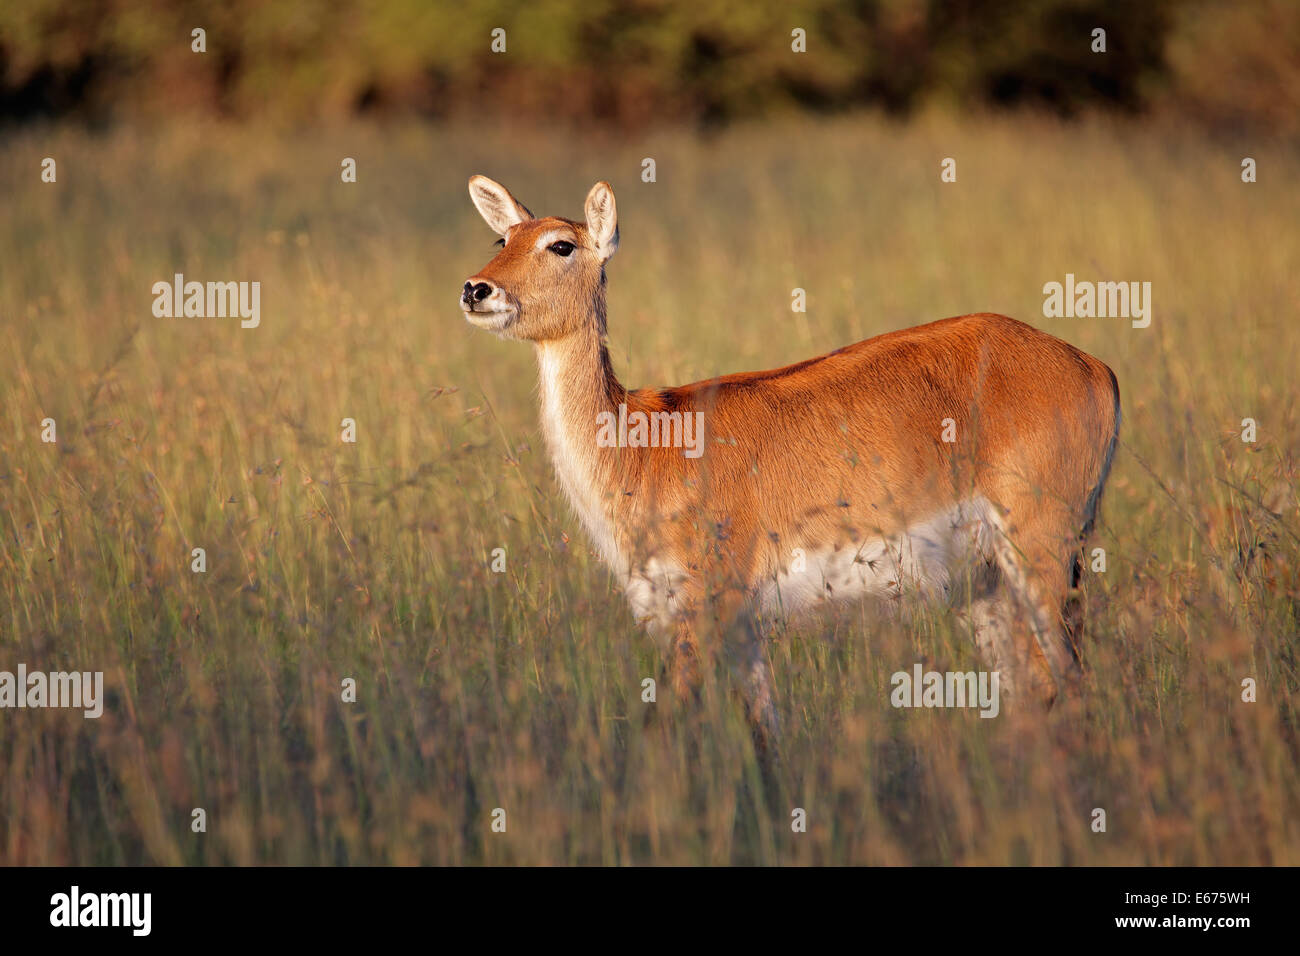 Female red lechwe antelope (Kobus leche) in tall grass, southern Africa Stock Photo